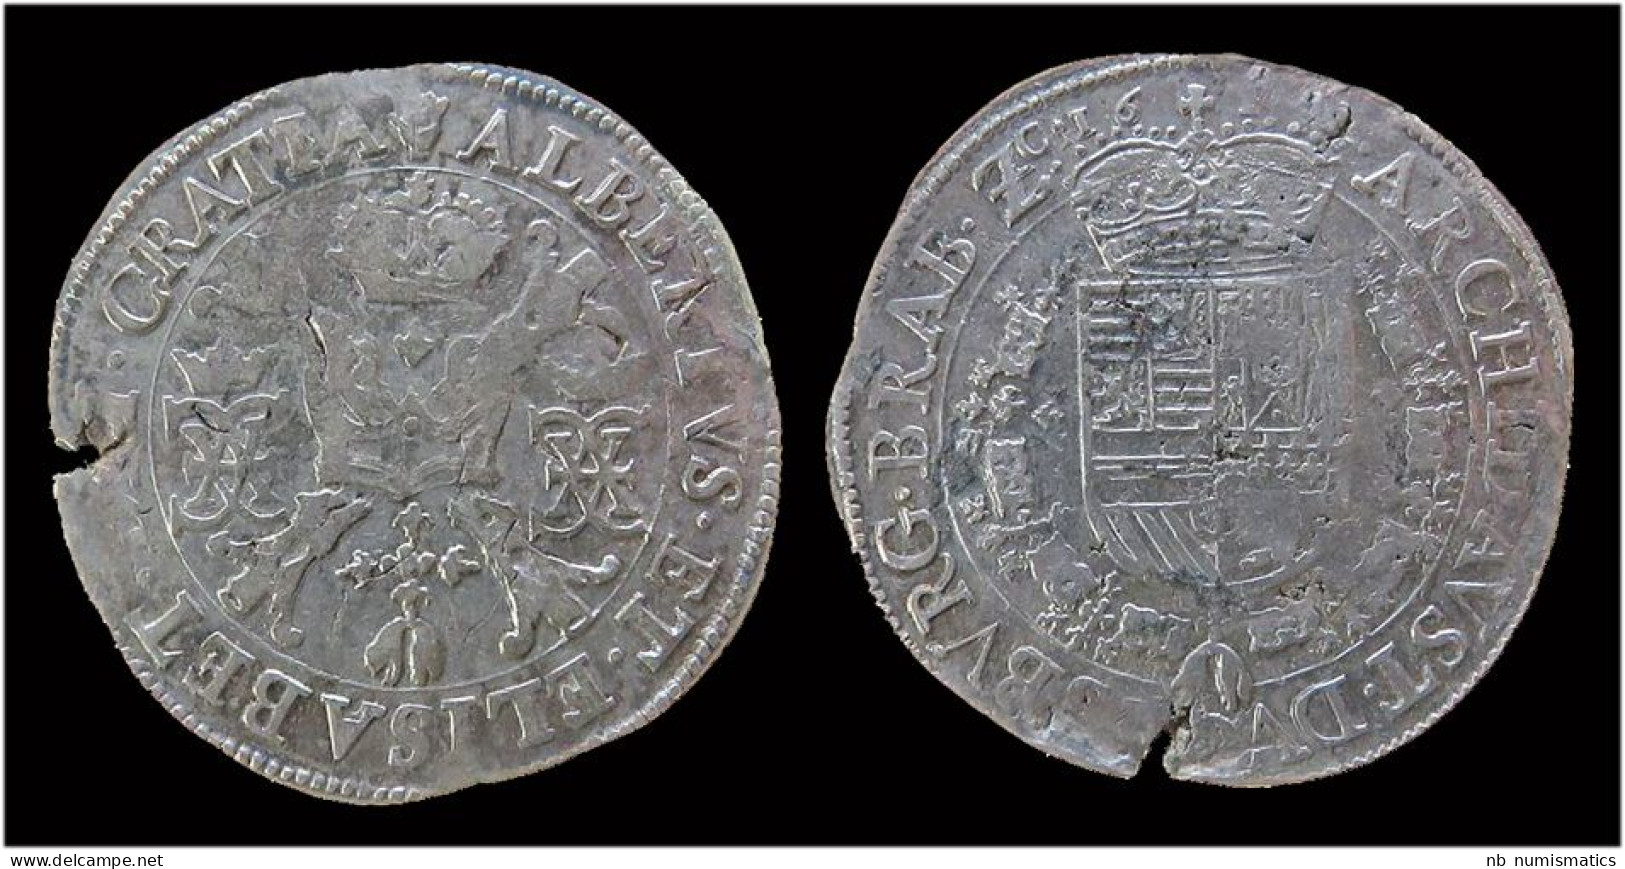 Southern Netherlands Philips IV Patagon 1665 - 1556-1713 Pays-Bas Espagols